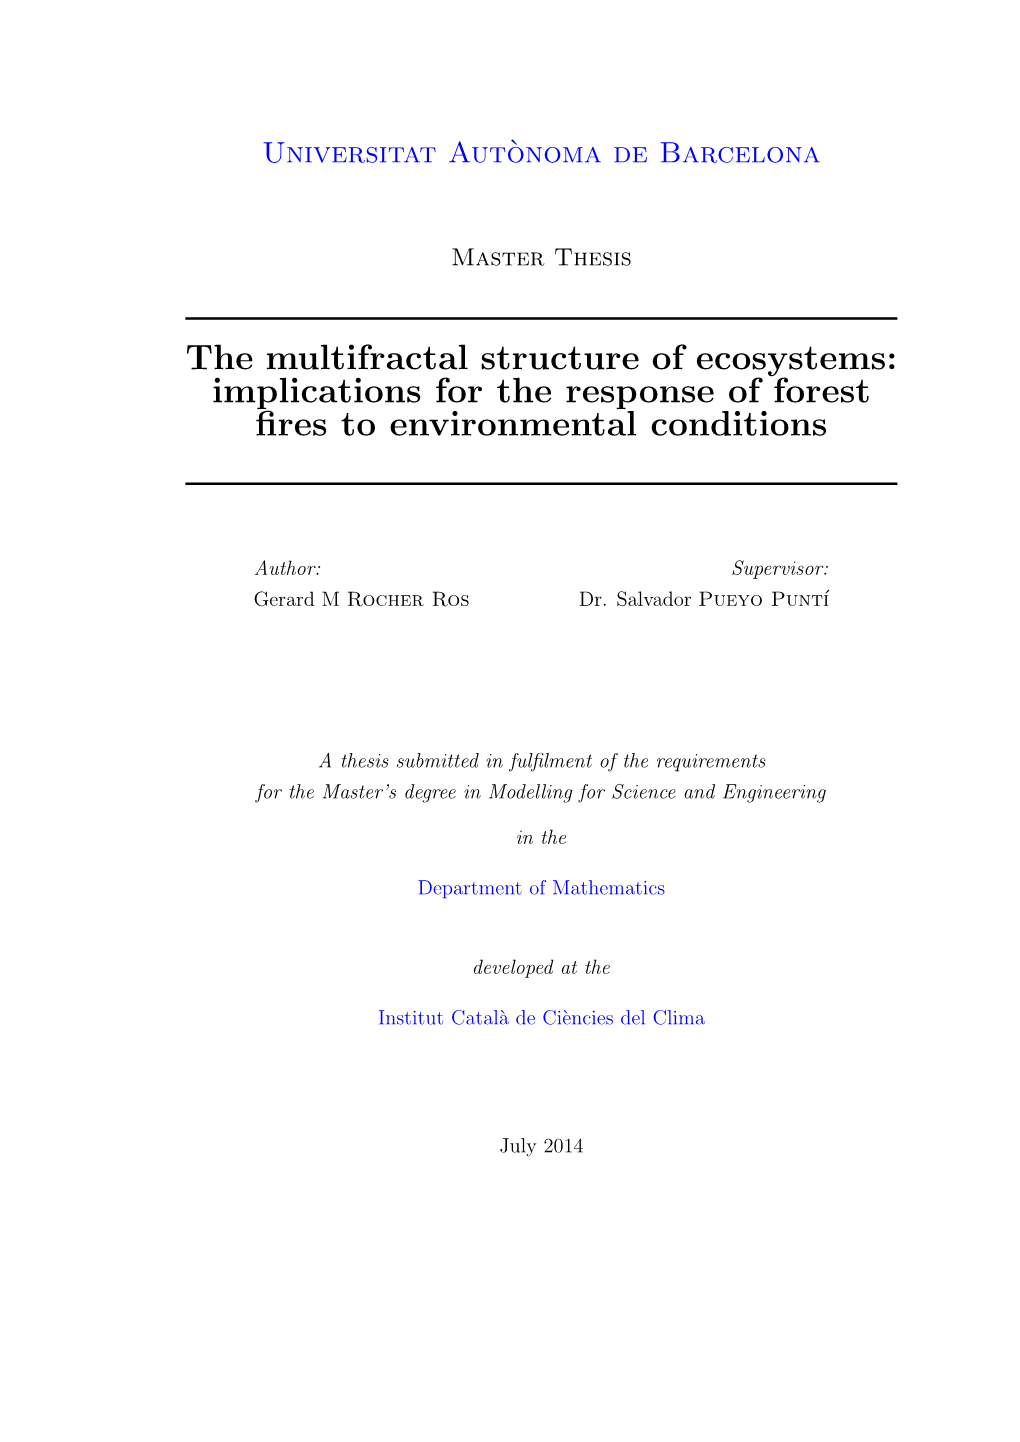 The Multifractal Structure of Ecosystems: Implications for the Response of Forest ﬁres to Environmental Conditions